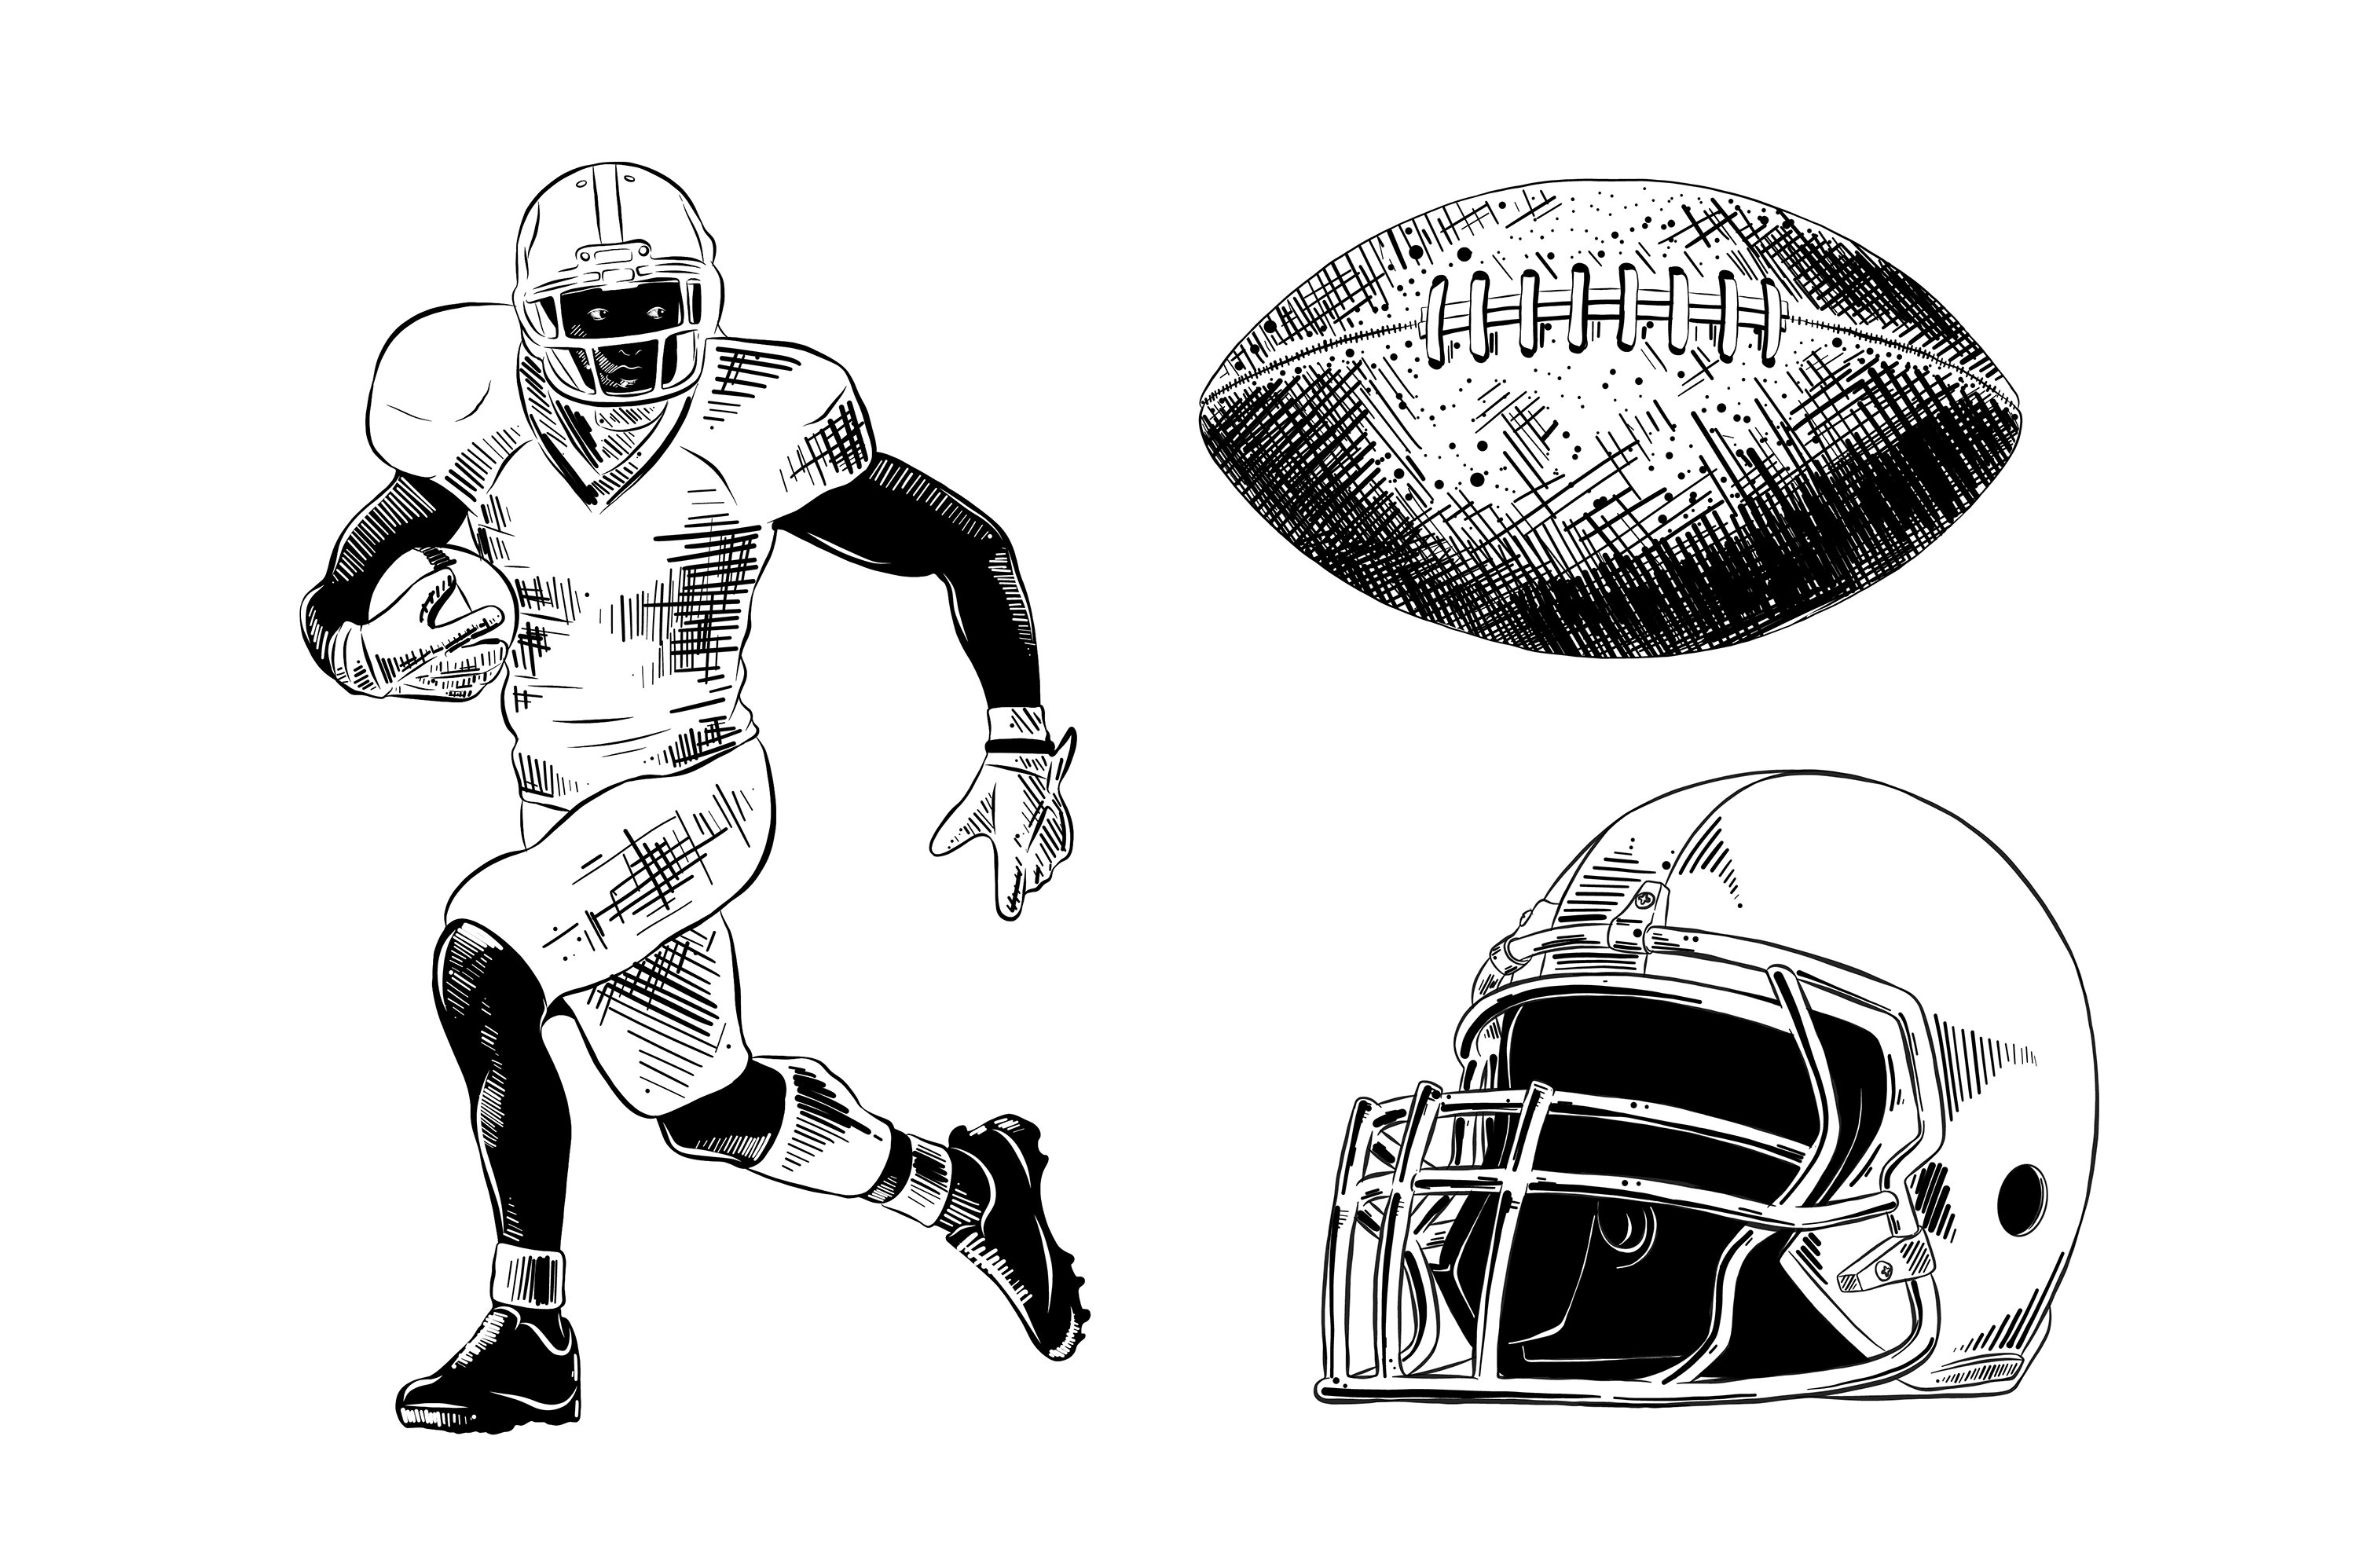 A drawing of a football player and a helmet.